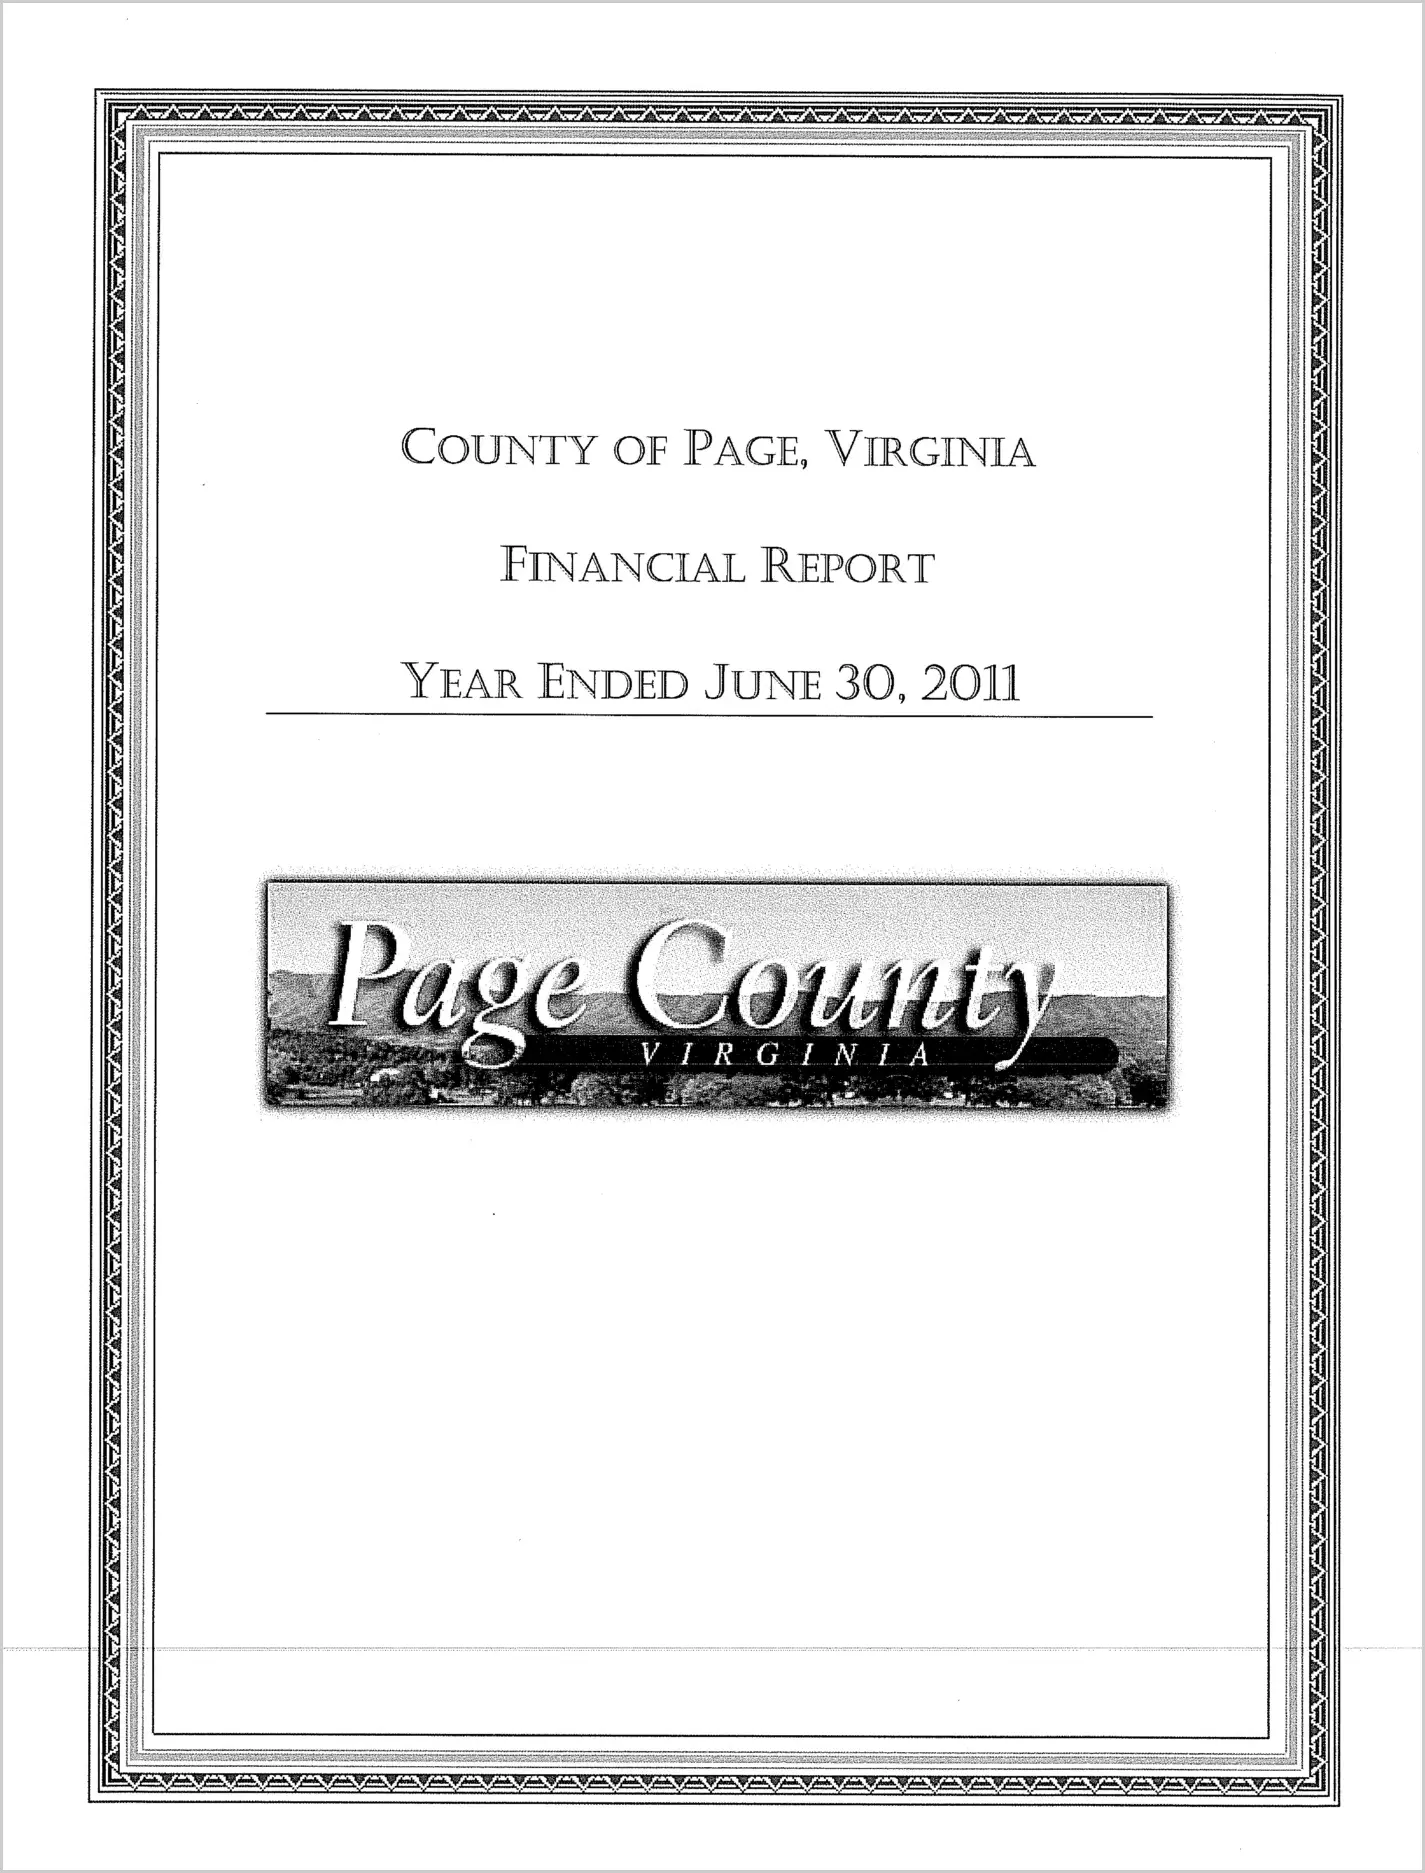 2011 Annual Financial Report for County of Page